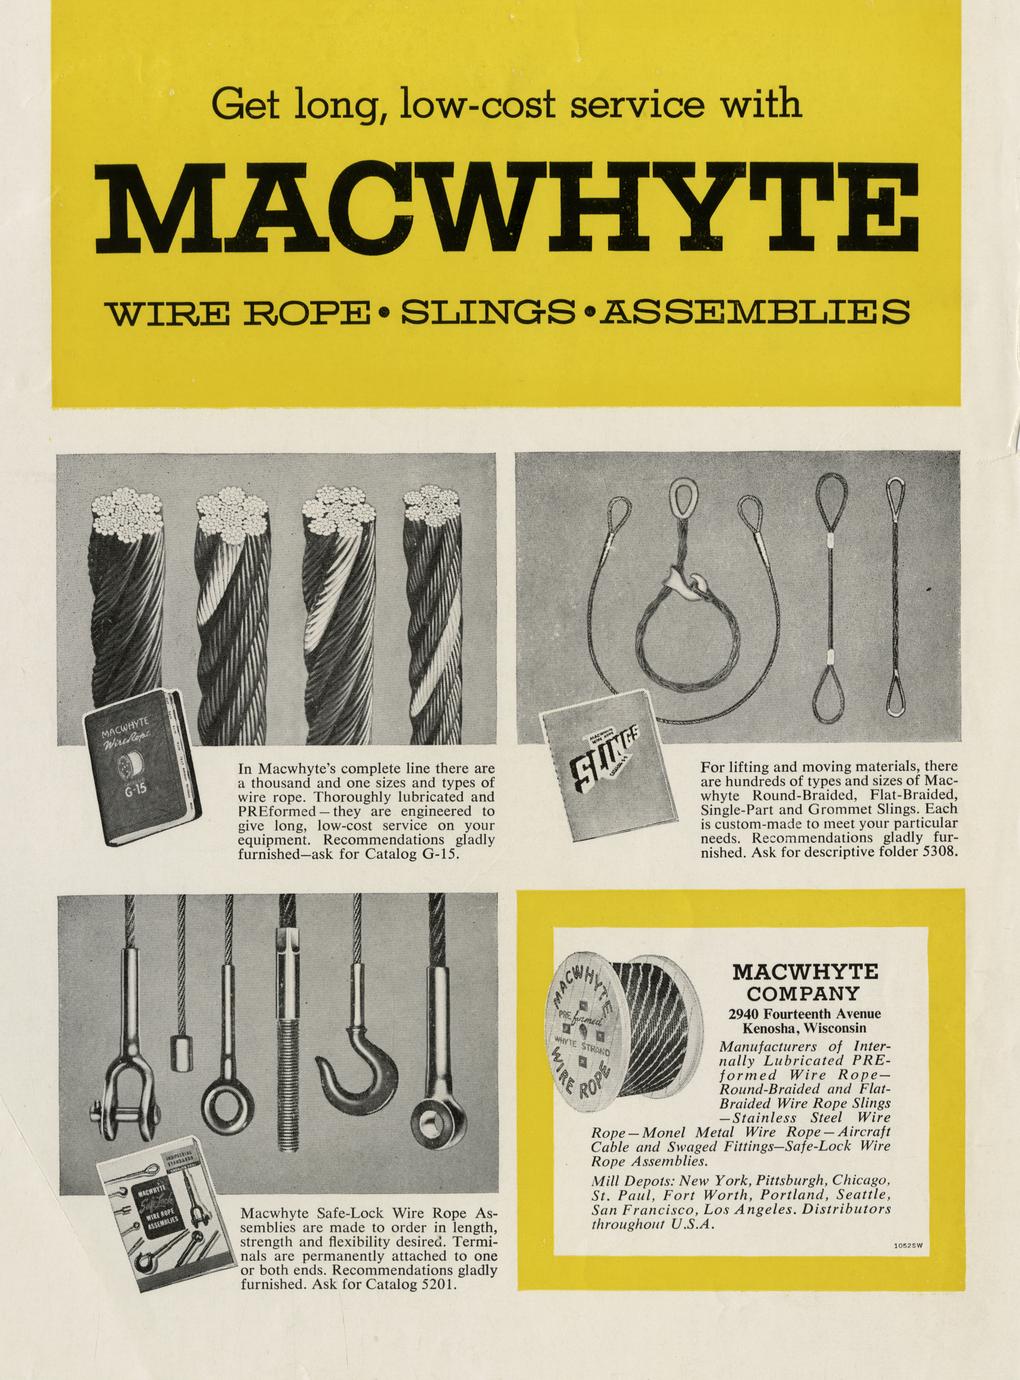 Get long, low-cost service with Macwhyte